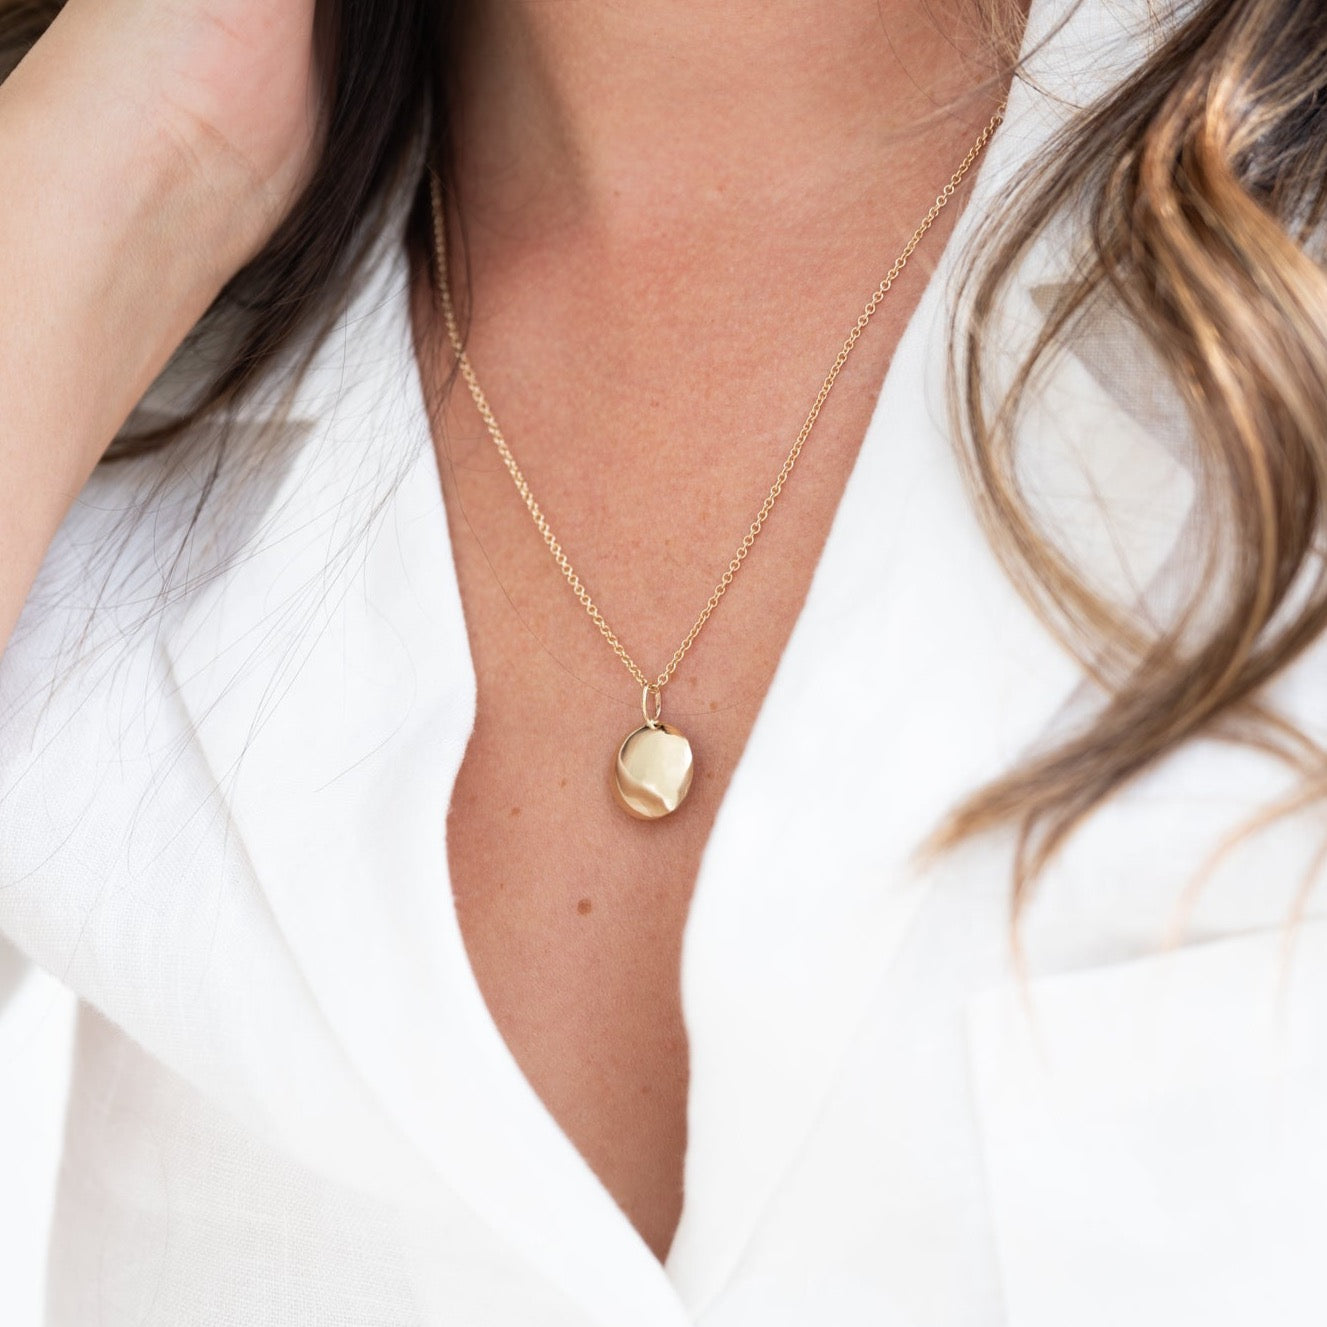 The Mini Puff Pendant Necklace – Yearly Company